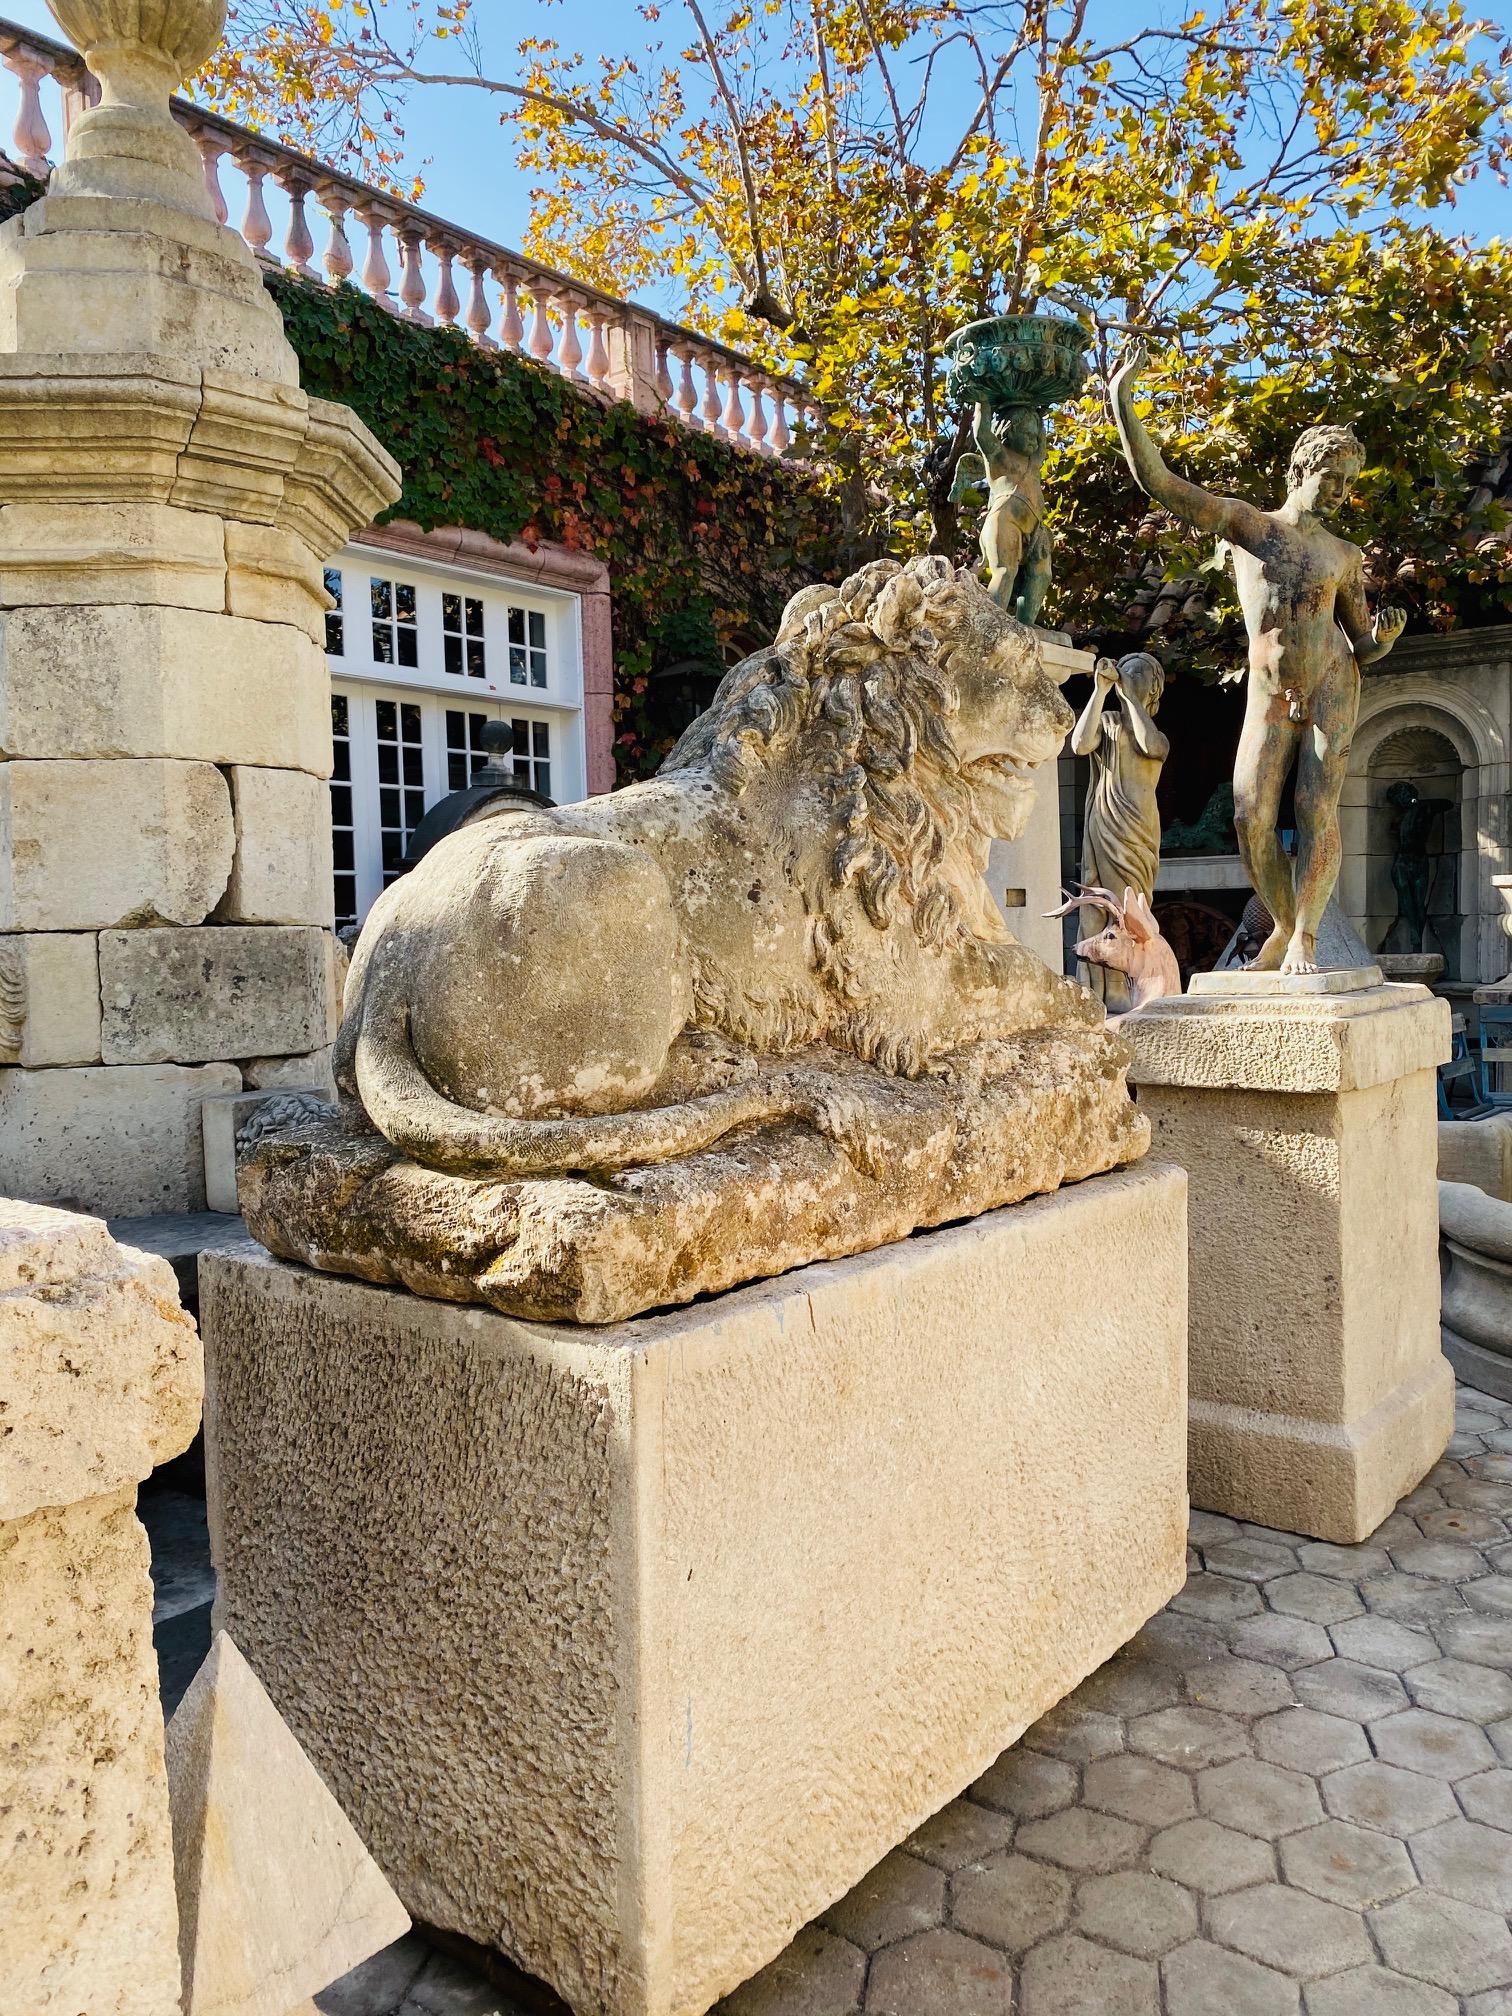 Exquisite monumental 18th century hand carved stone figure of a regal lion garden Statue sculpture, as a fountain center piece, or as freestanding art piece. Almost 5 Feet Long
Fine, impressive hand-sculpted garden statues animalier exhibit